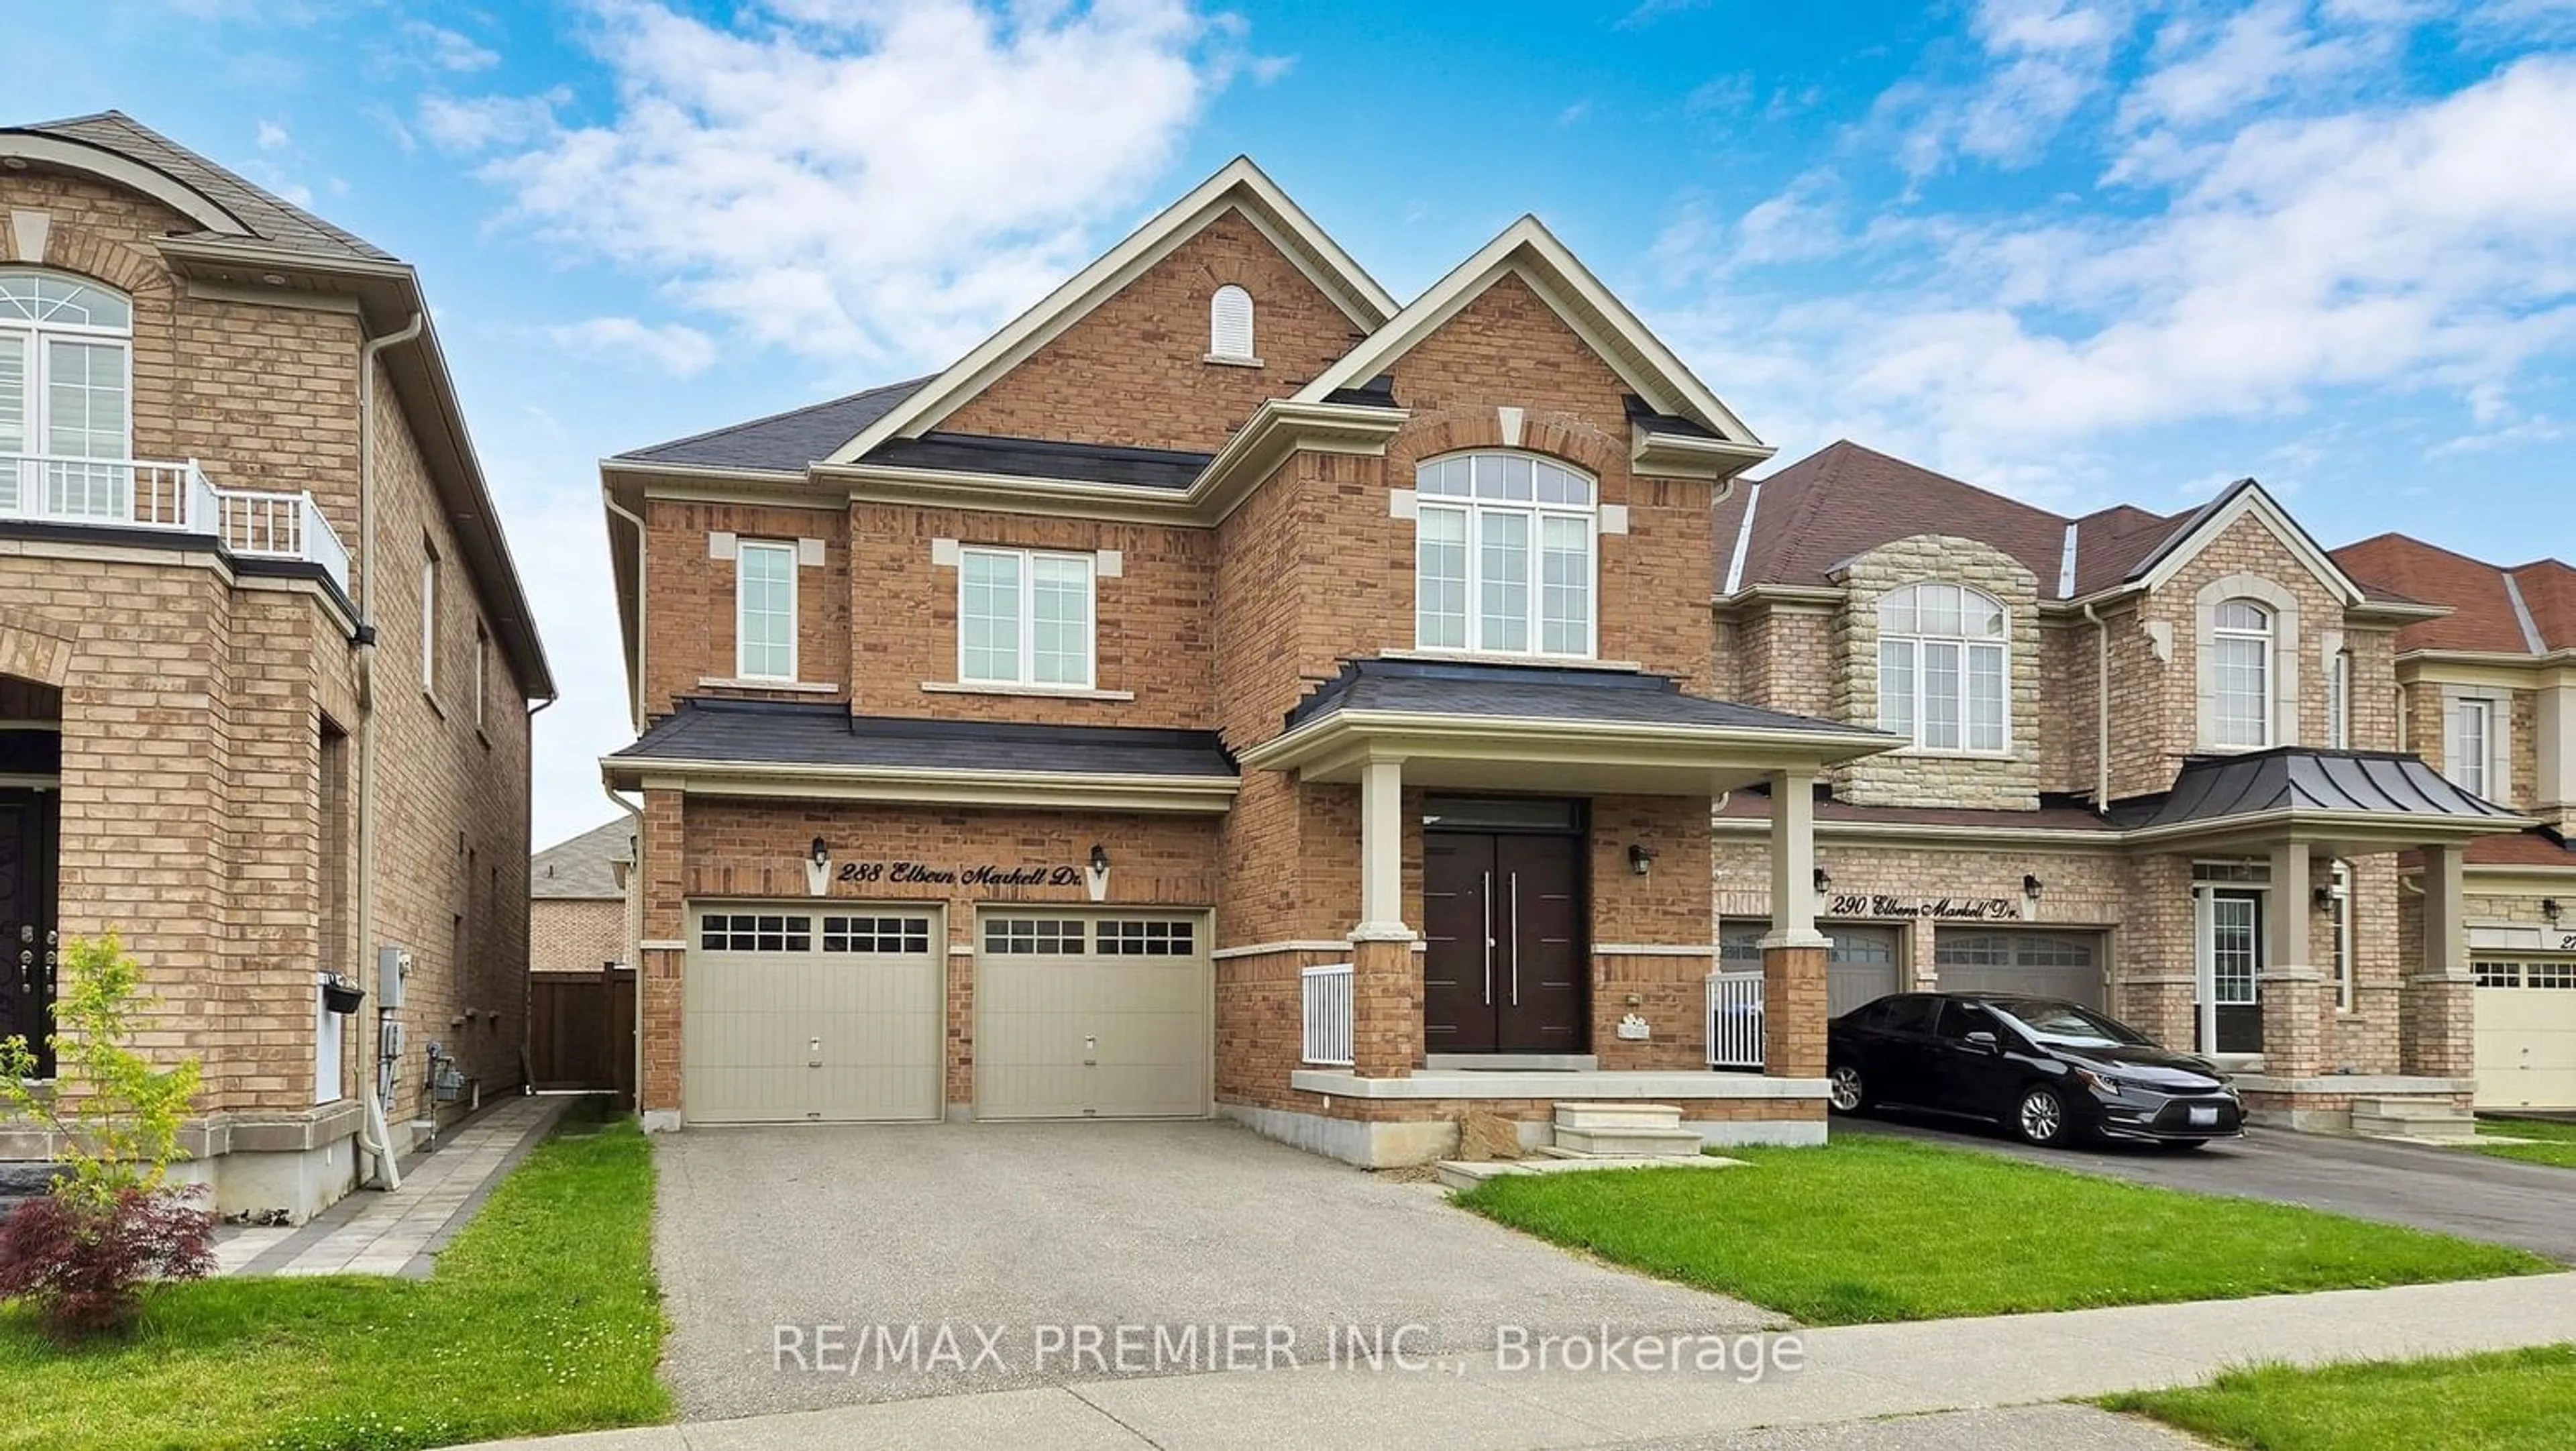 Home with brick exterior material for 288 Elbern Markell Dr, Brampton Ontario L6X 5K9